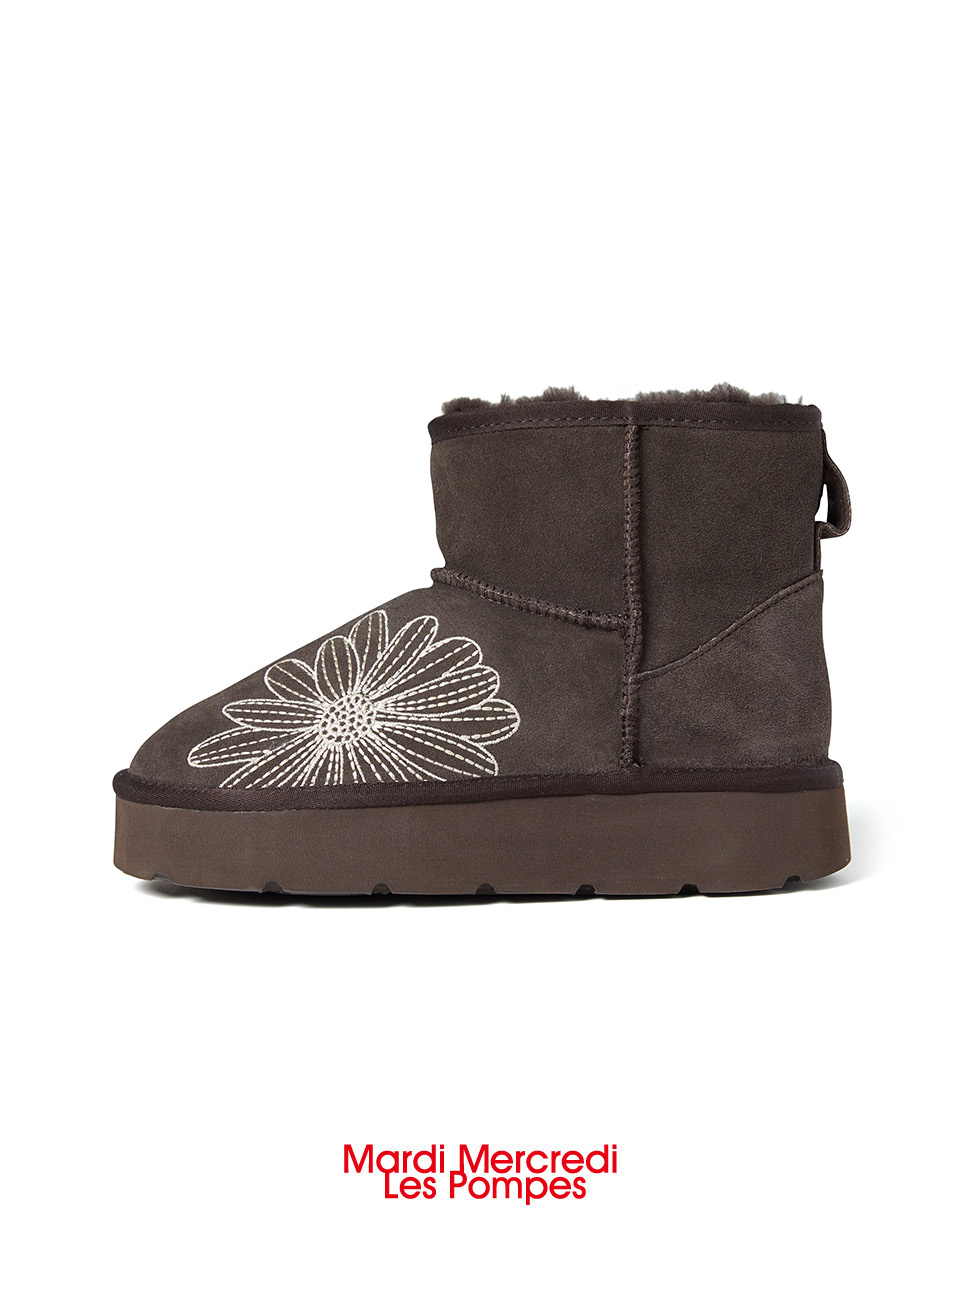 CLASSIQUE UGG BOOTS_BROWN